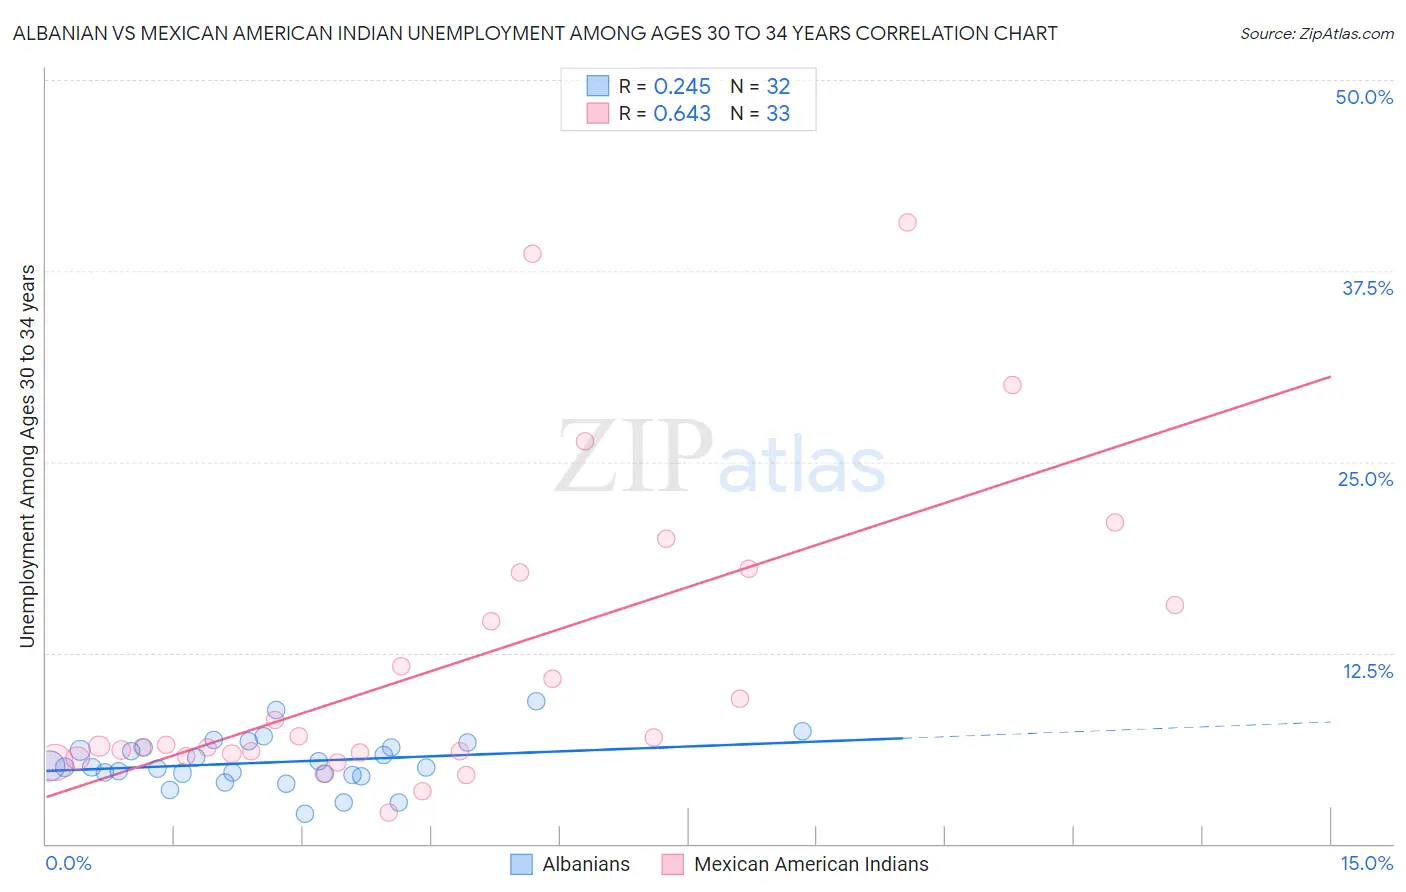 Albanian vs Mexican American Indian Unemployment Among Ages 30 to 34 years